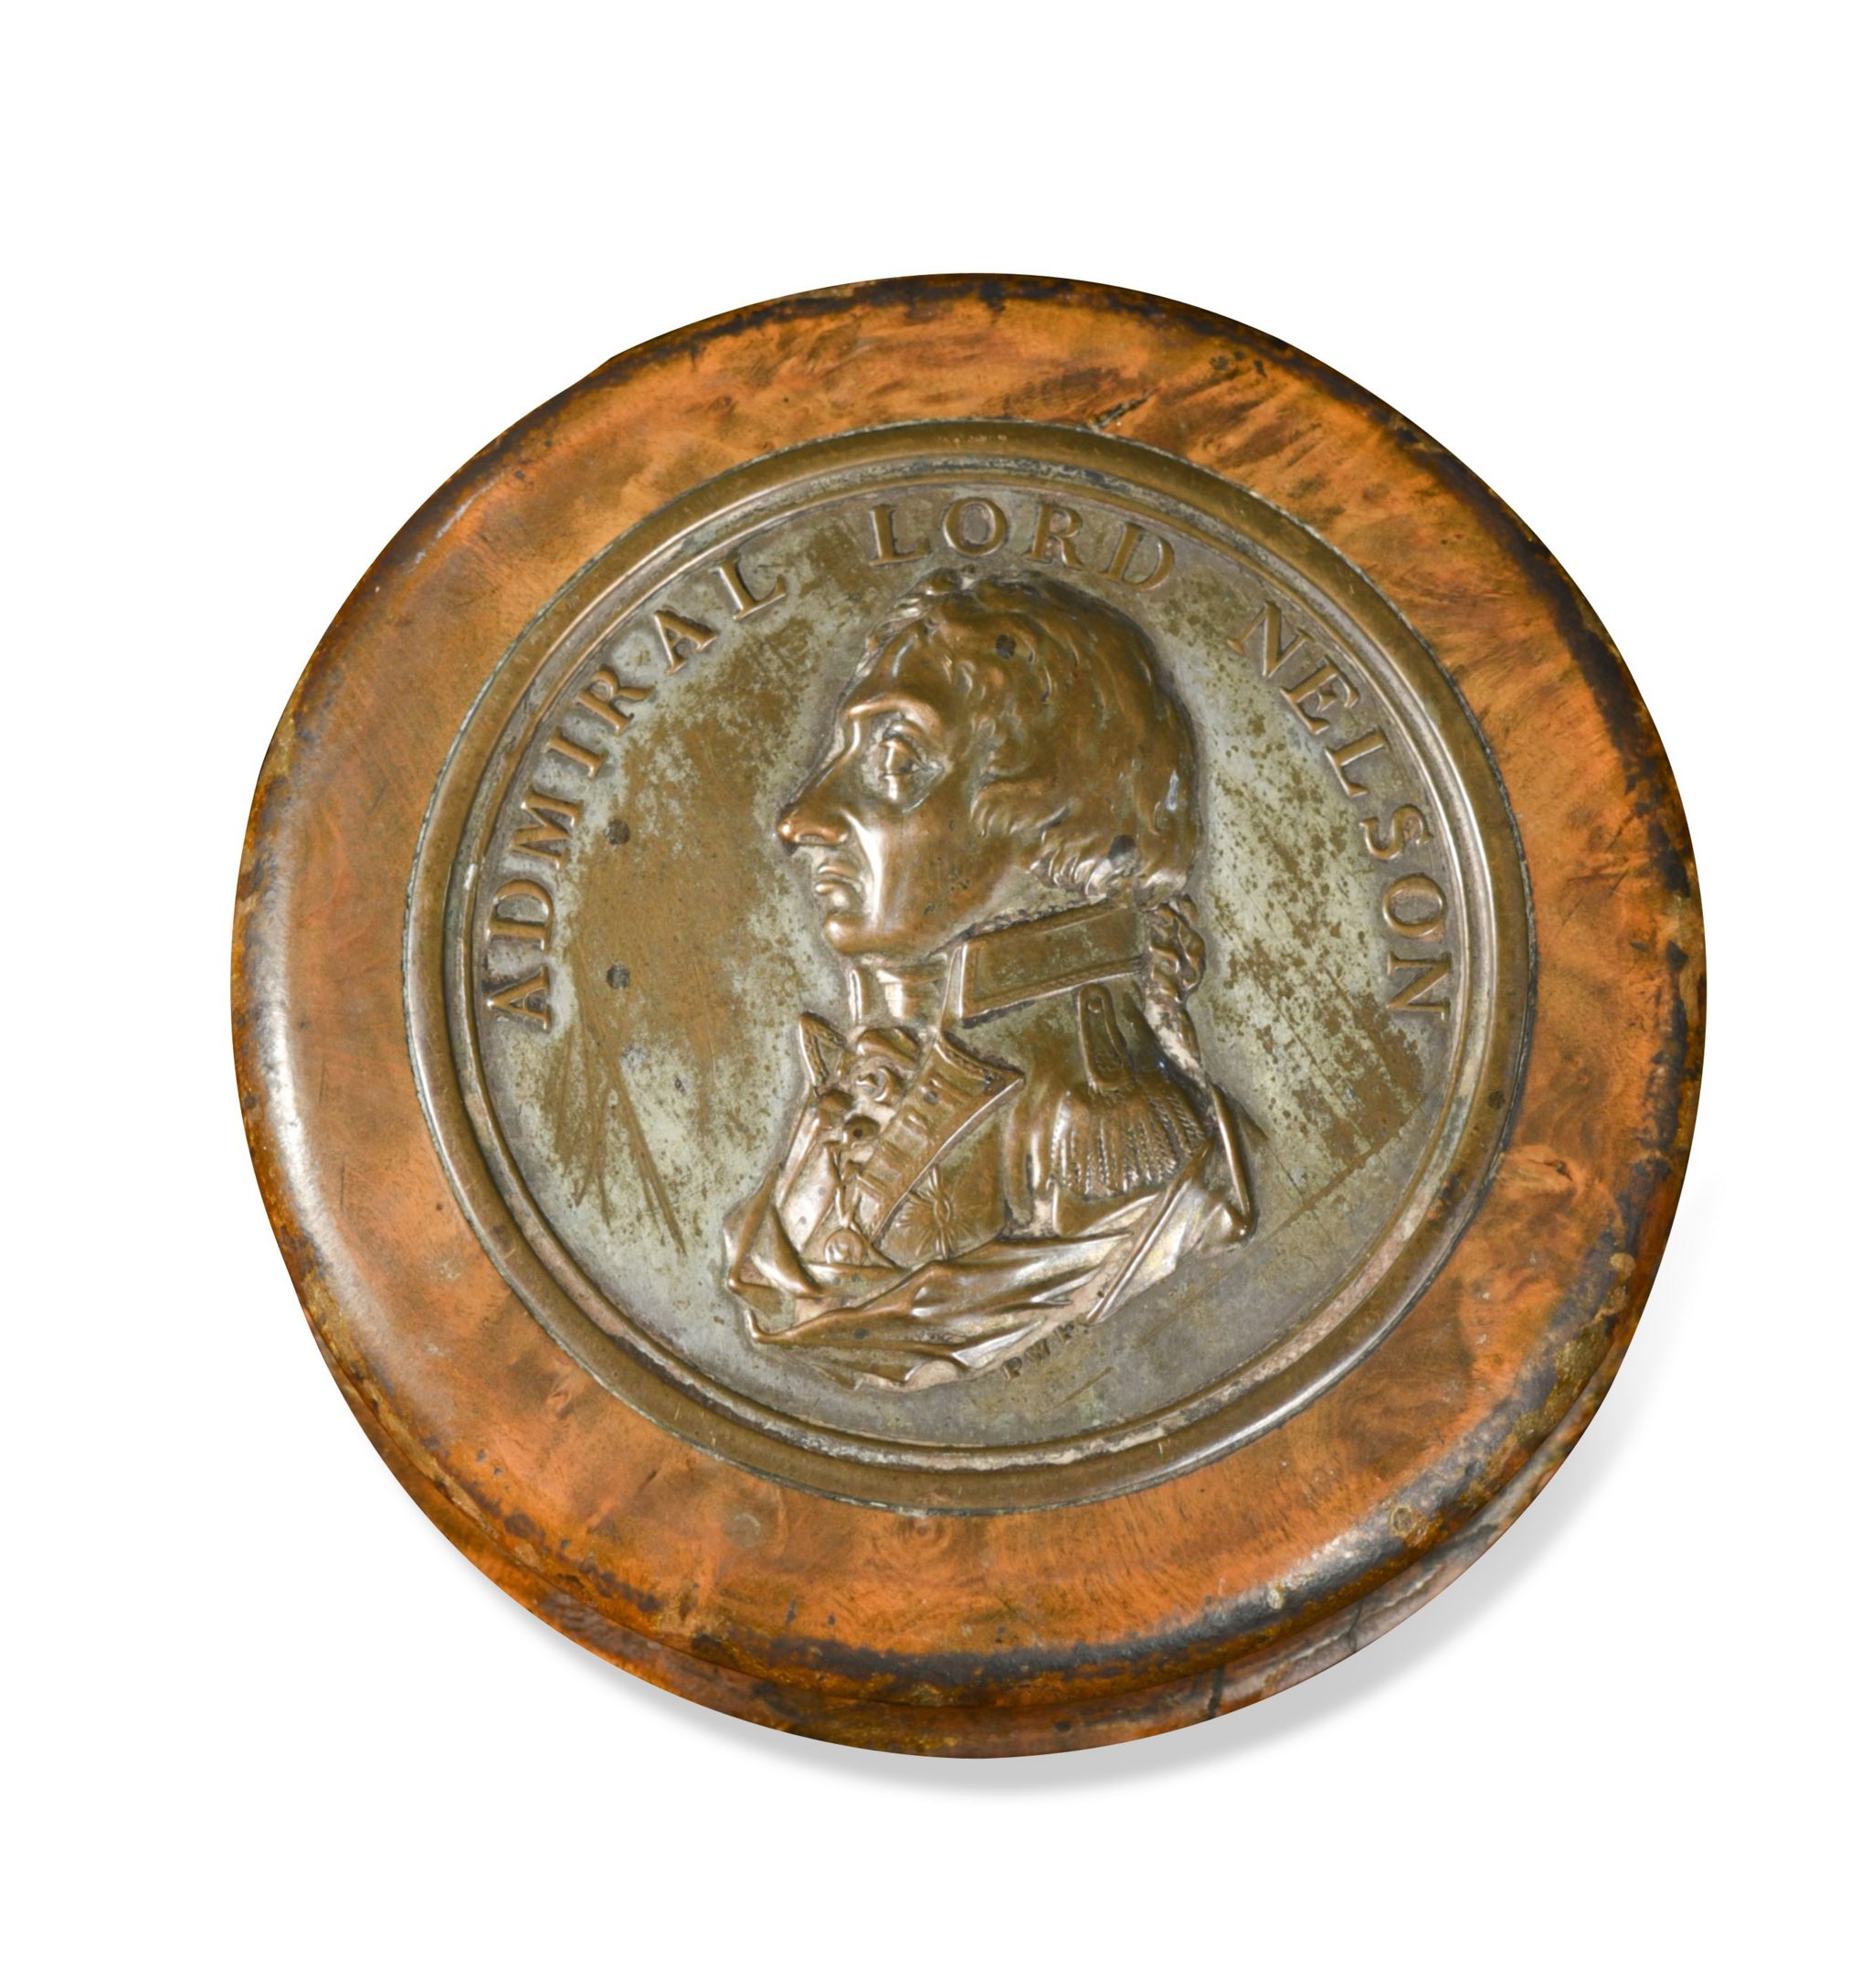 A memorial snuff box with a portrait of Admiral Lord Nelson on it 